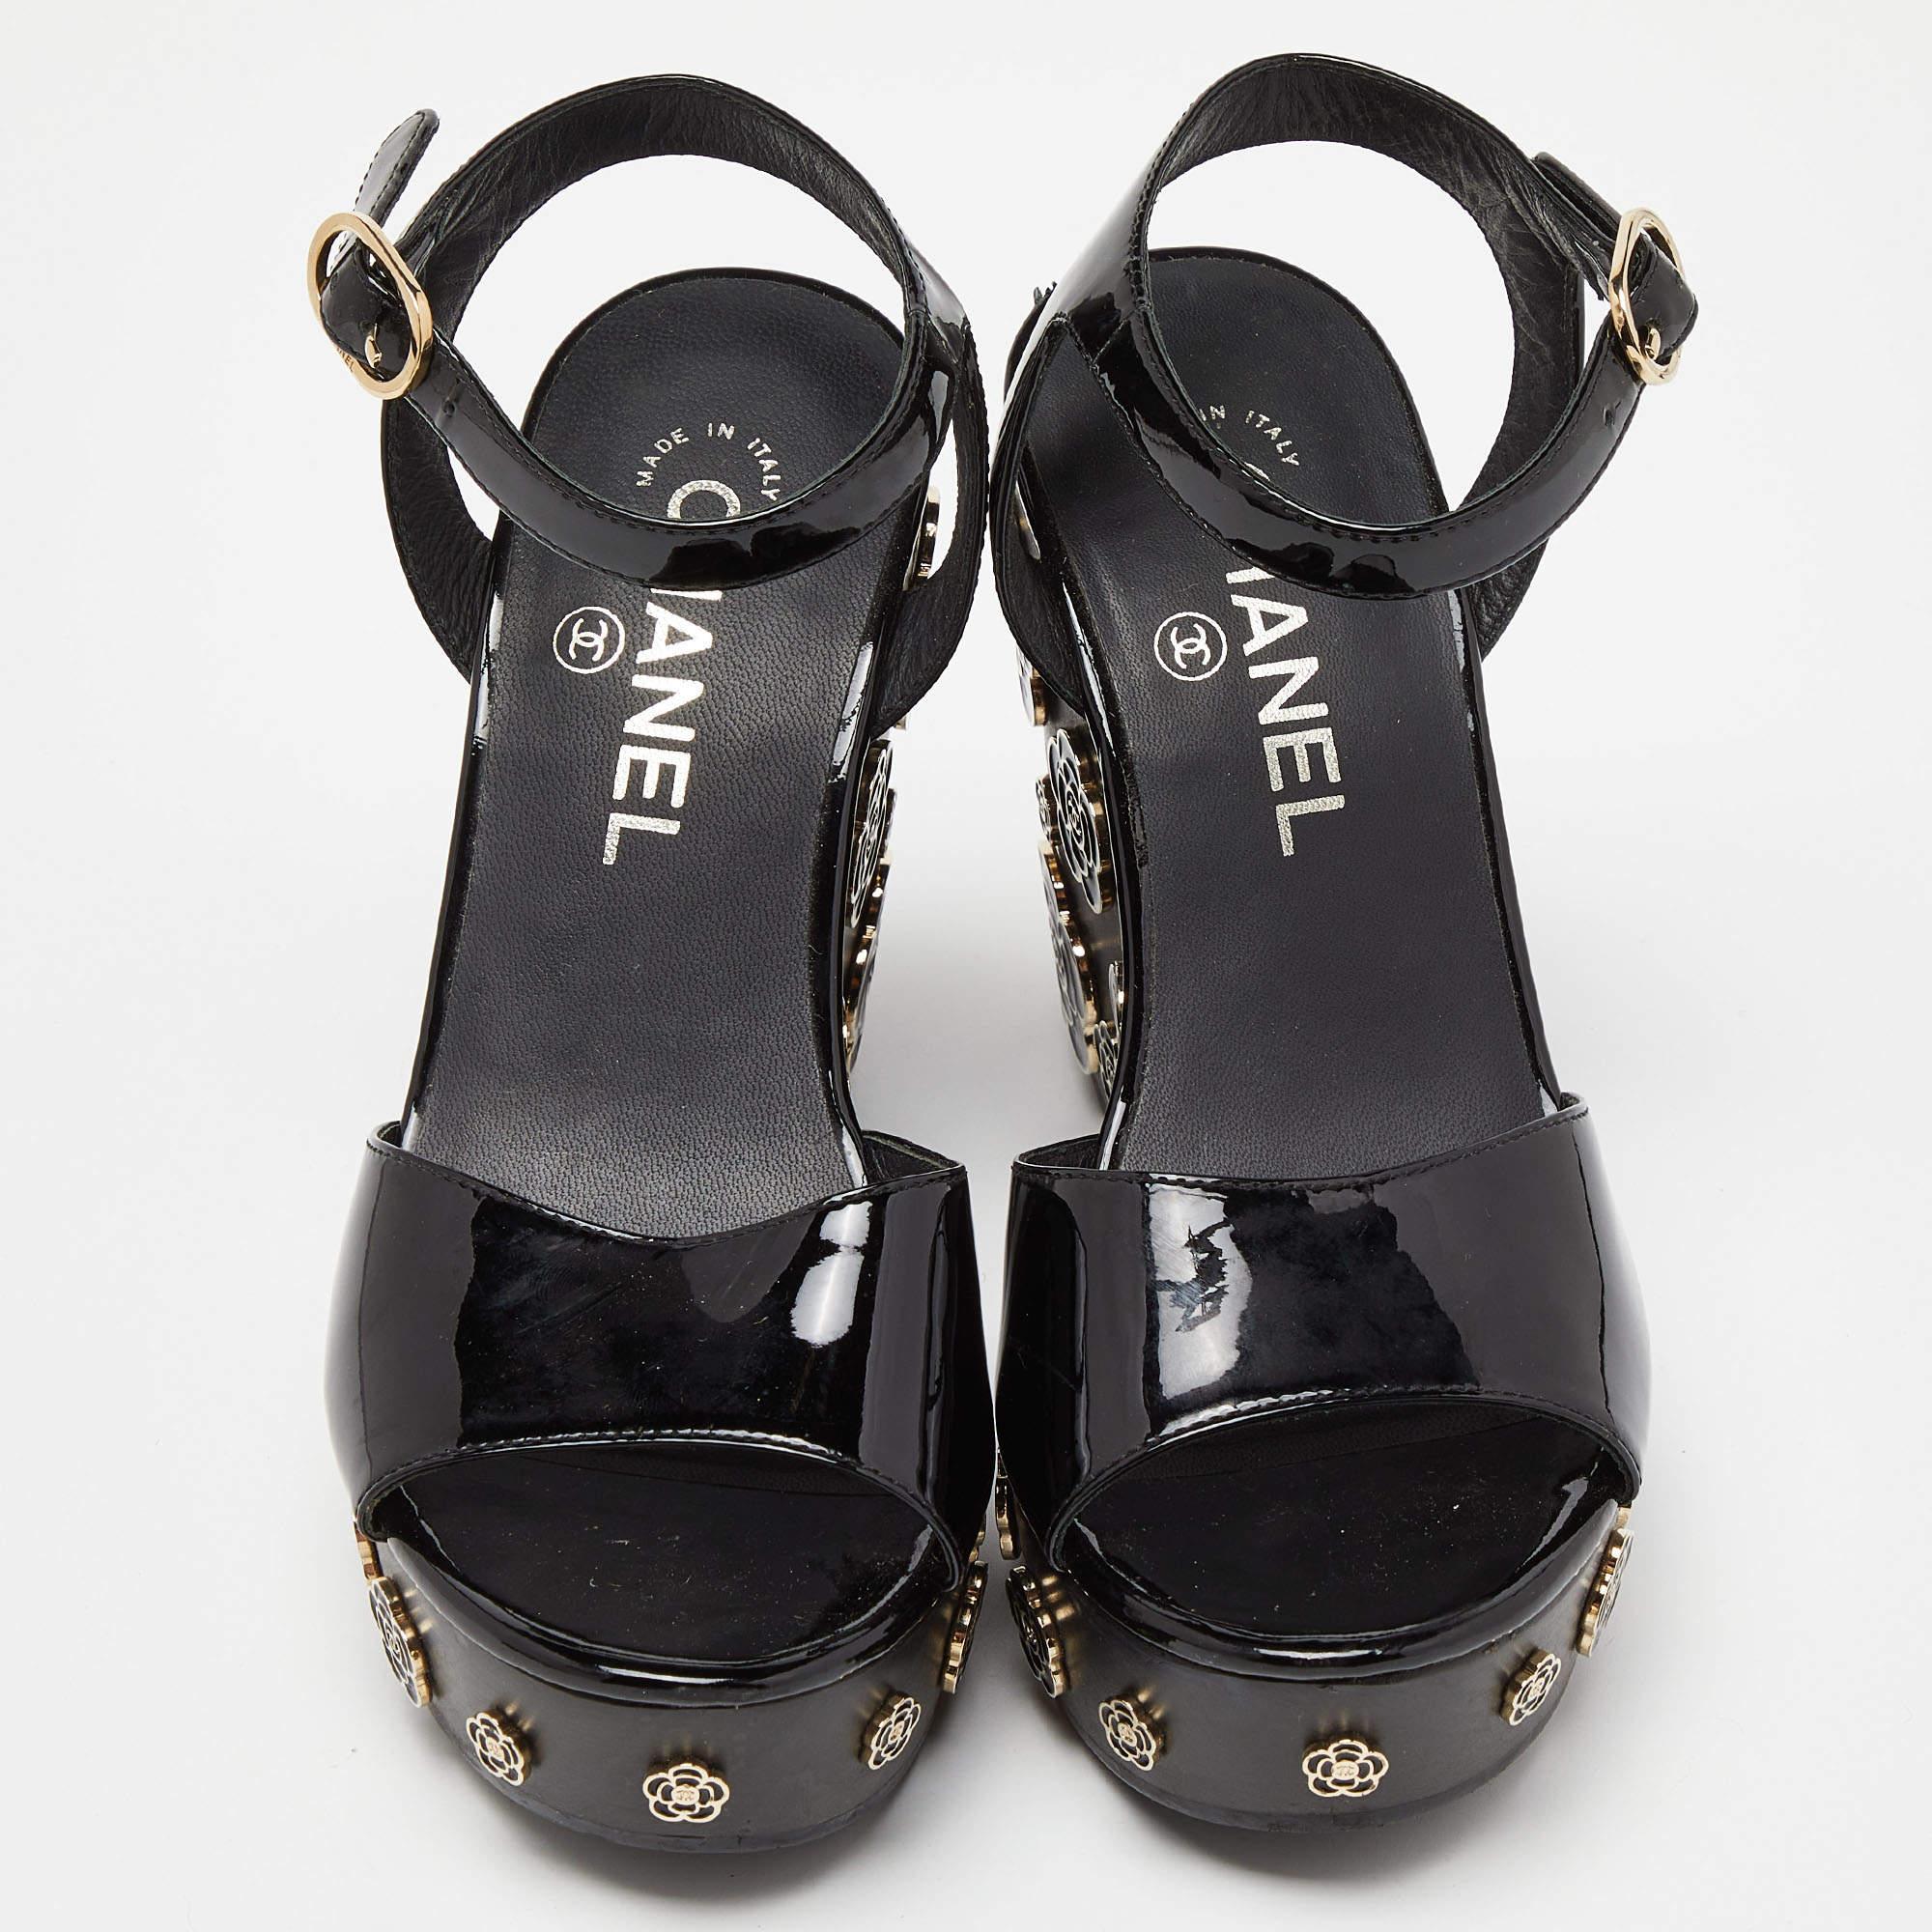 Deliver statement looks with these sandals from Chanel! From their shape and detailing to their overall appeal, they exude sophisticated style. The sandals come crafted from leather and have camelia motifs on the wedge heels.

